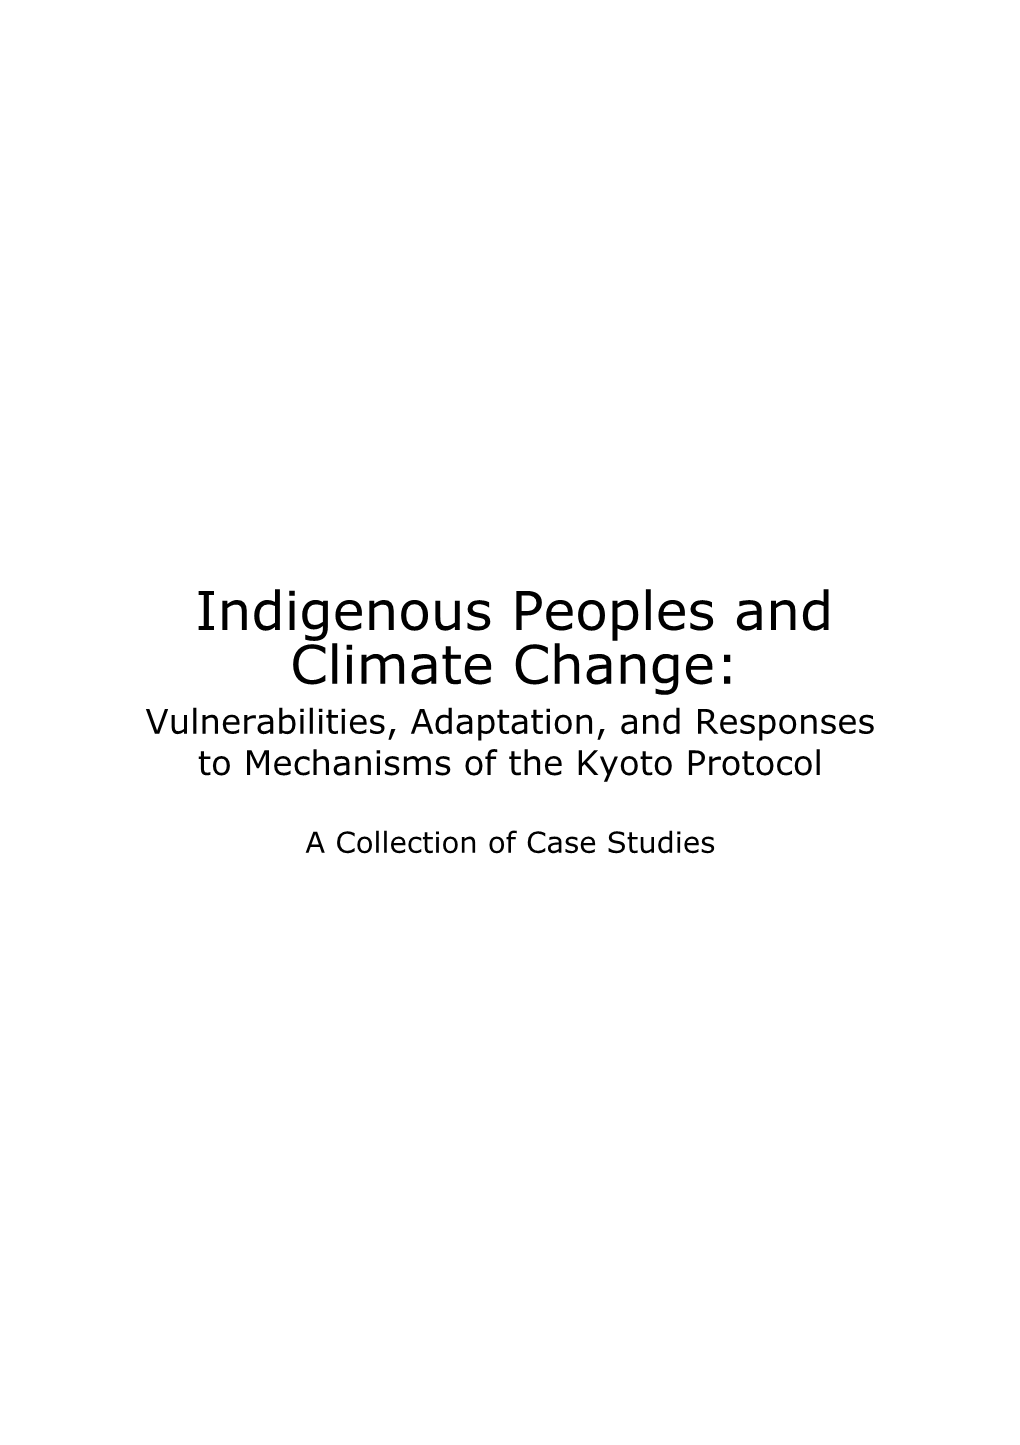 Indigenous Peoples and Climate Change: Vulnerabilities, Adaptation, and Responses to Mechanisms of the Kyoto Protocol